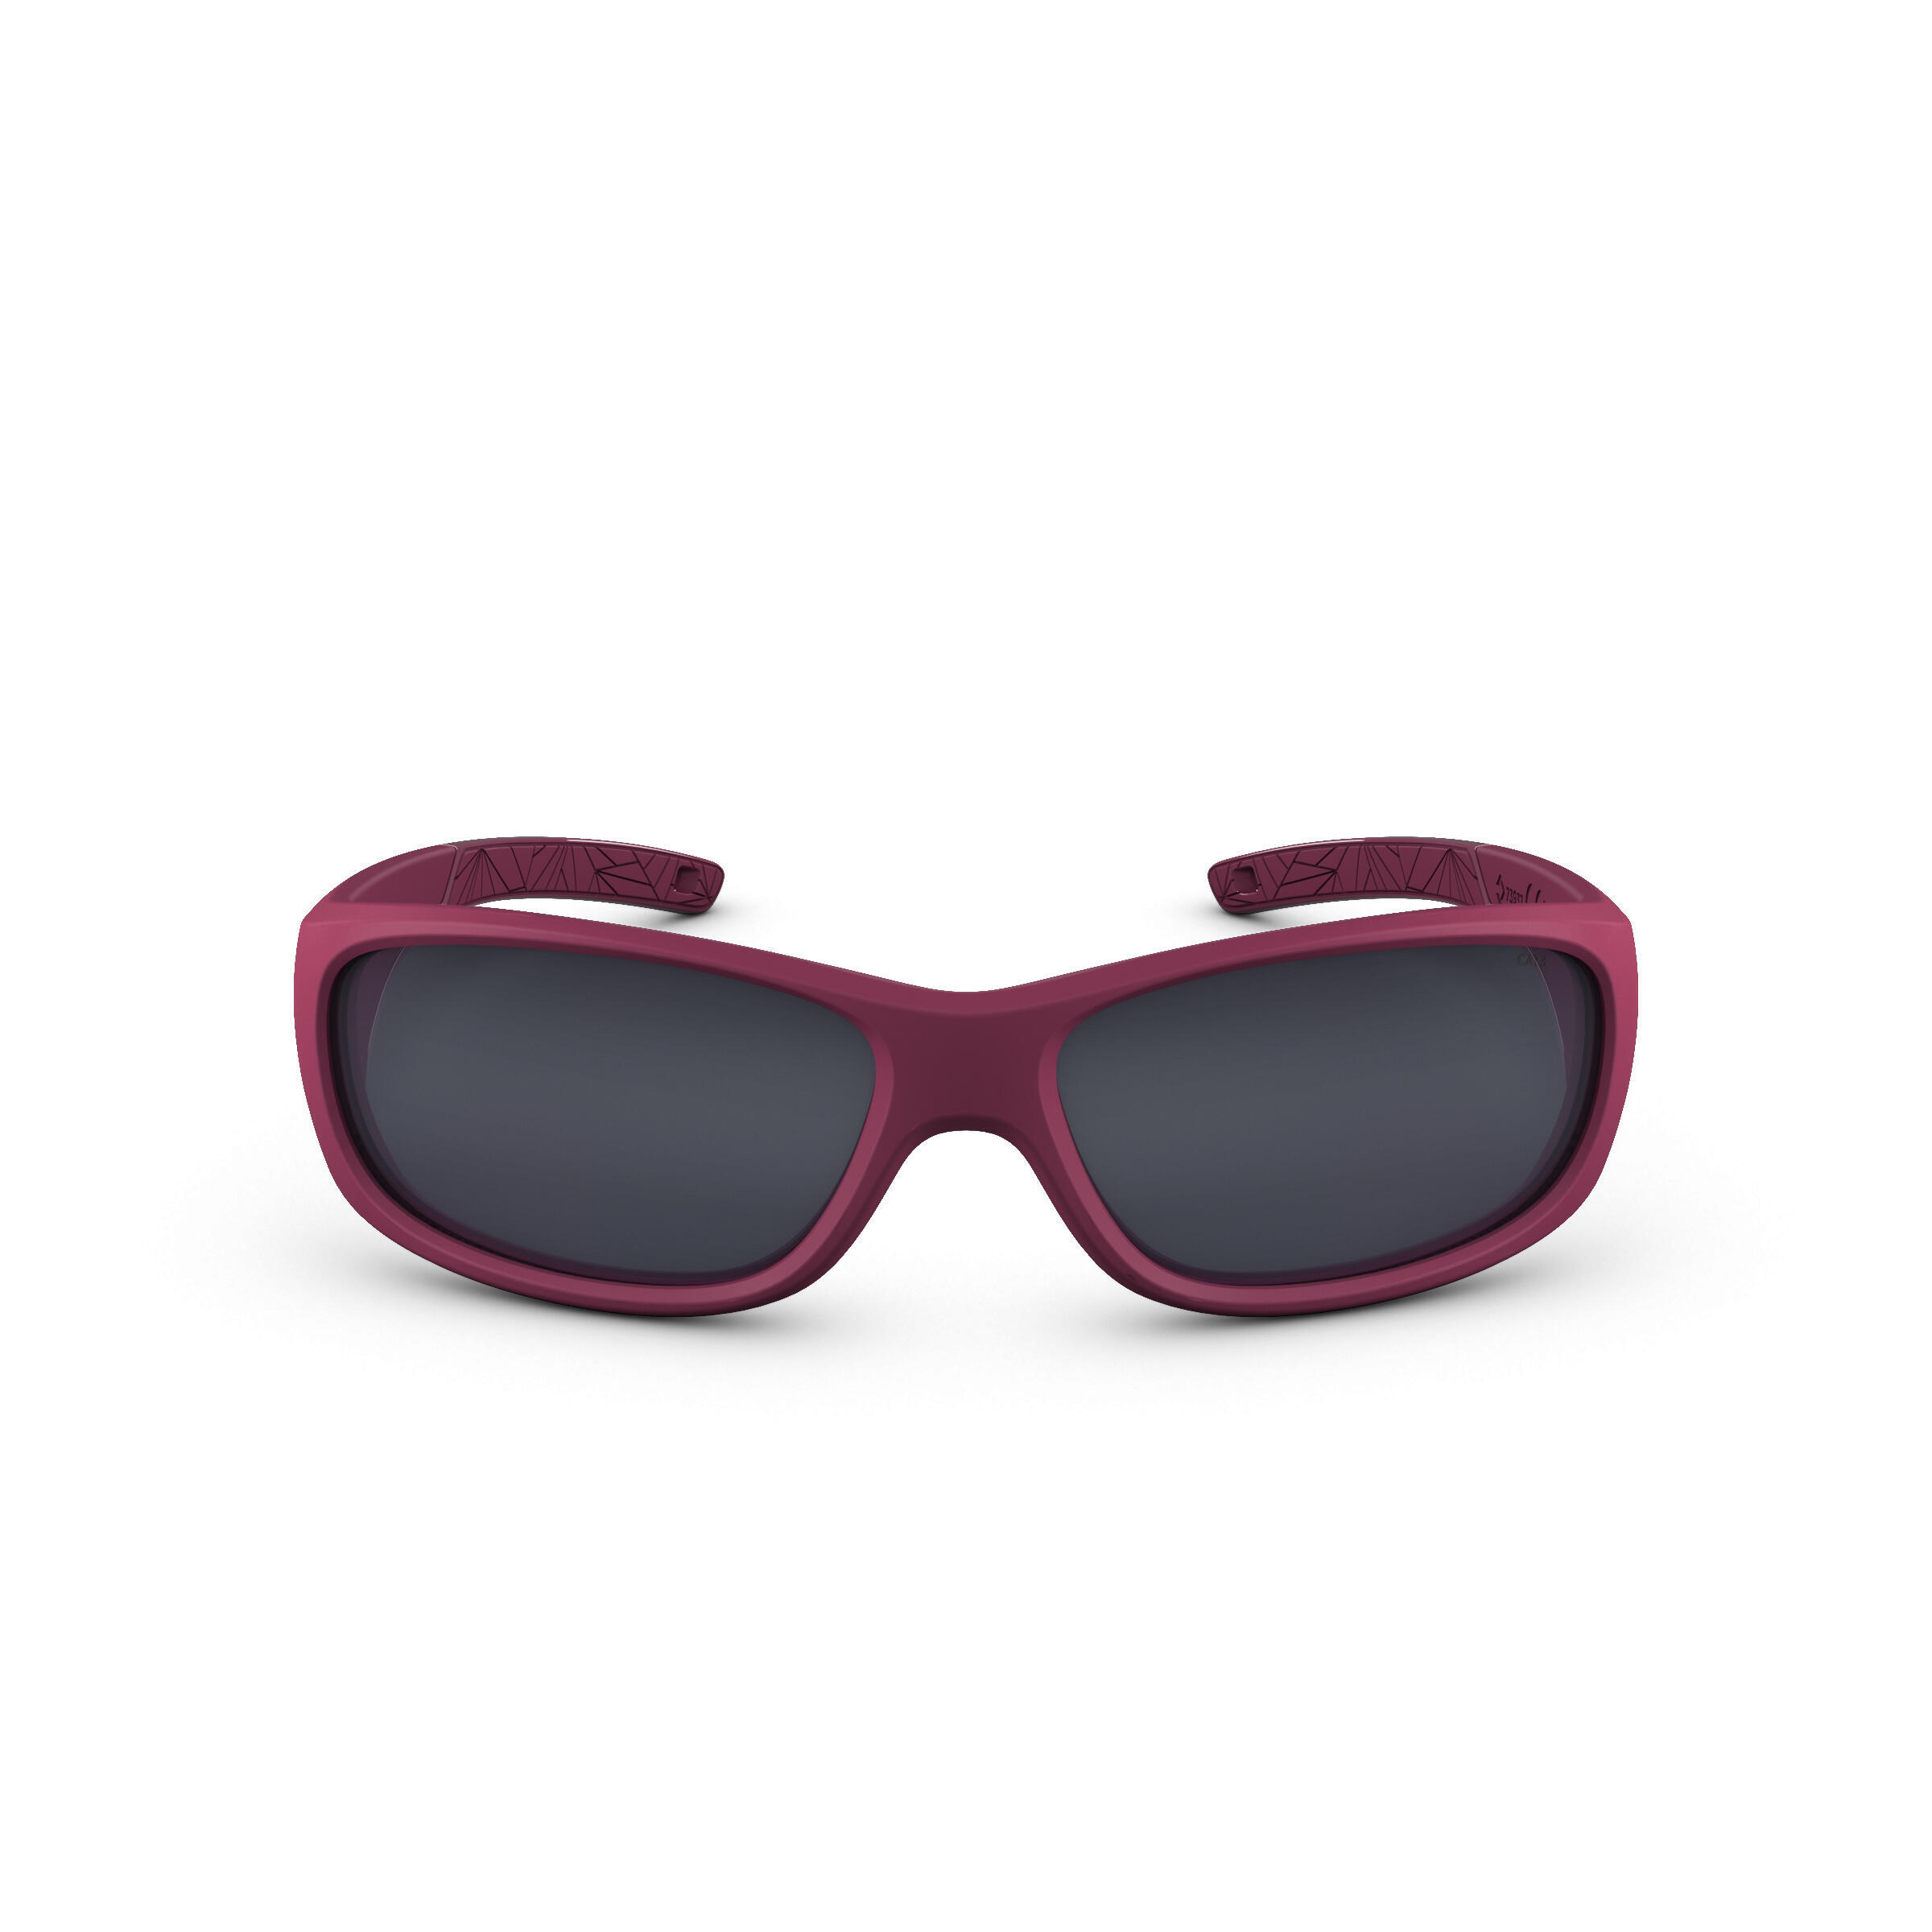 Kids Hiking Sunglasses Aged 6-10 MH T100 Category 3 2/10